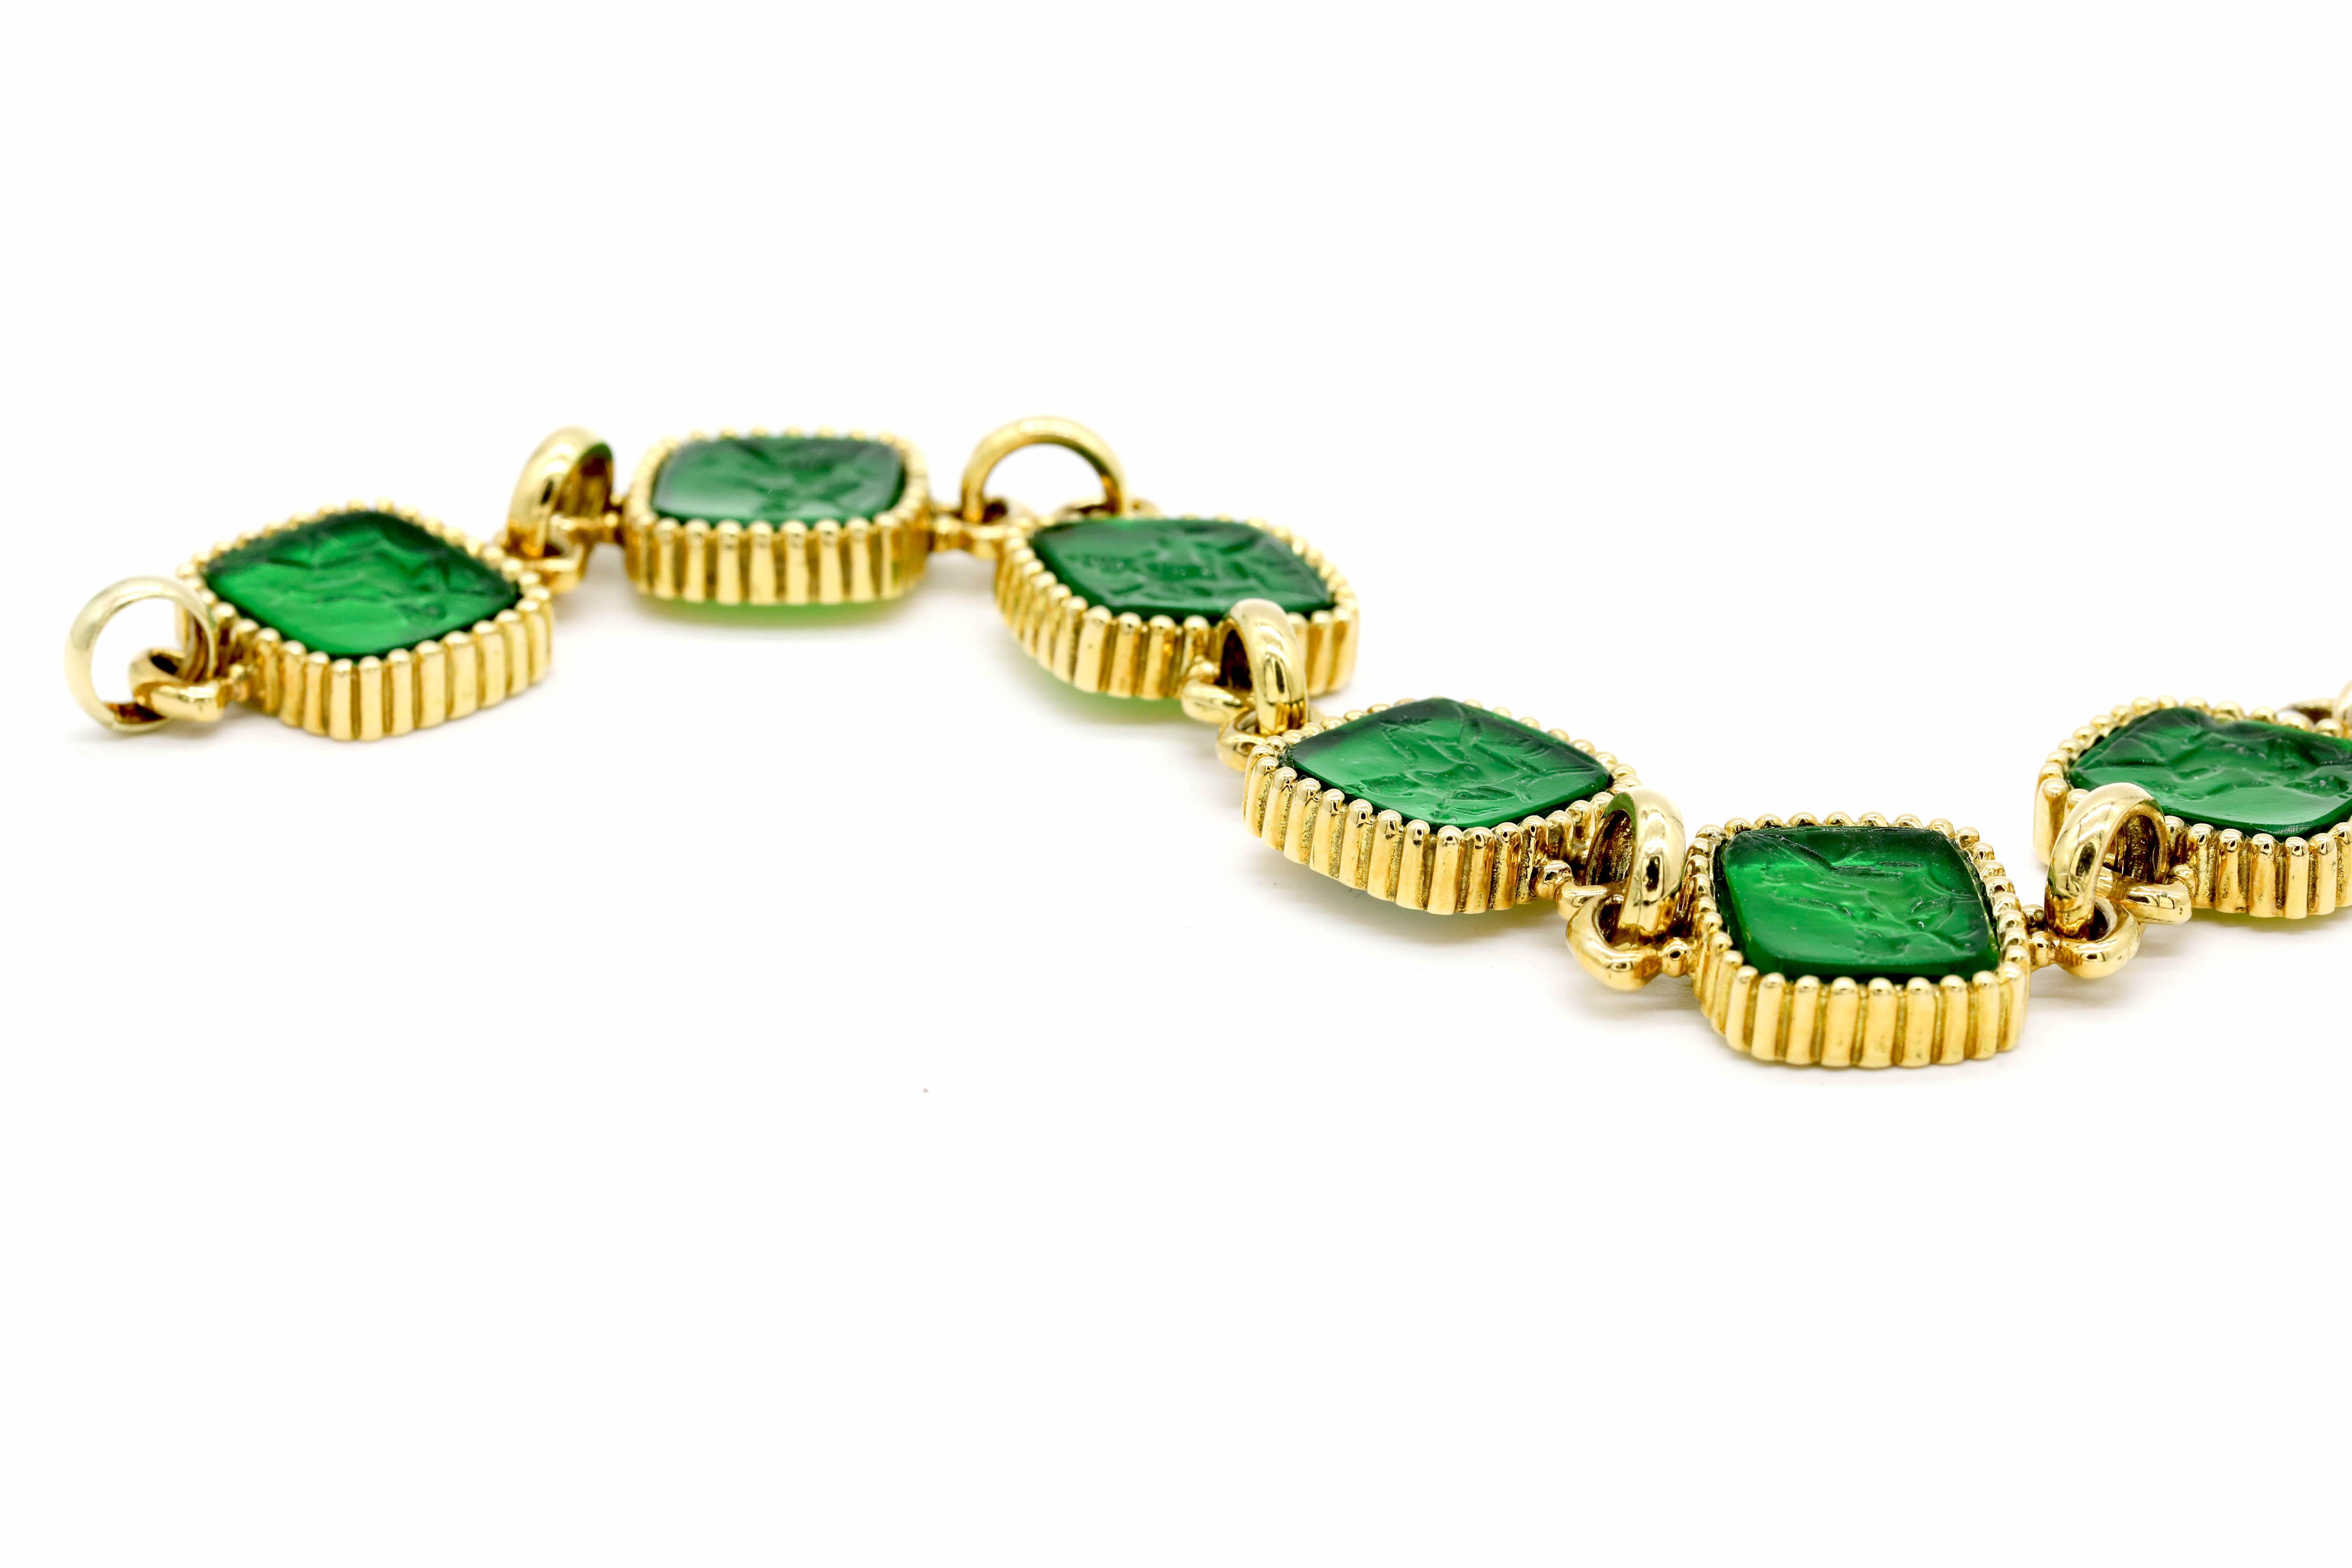 New Victorian Green Carved Italian Murano Glass Carved Intaglio Bracelet 18k Yellow Gold

A cameo, an intaglio is created by carving below the surface to produce an image in relief, with the purpose of pressing into sealing wax. Intaglios were often